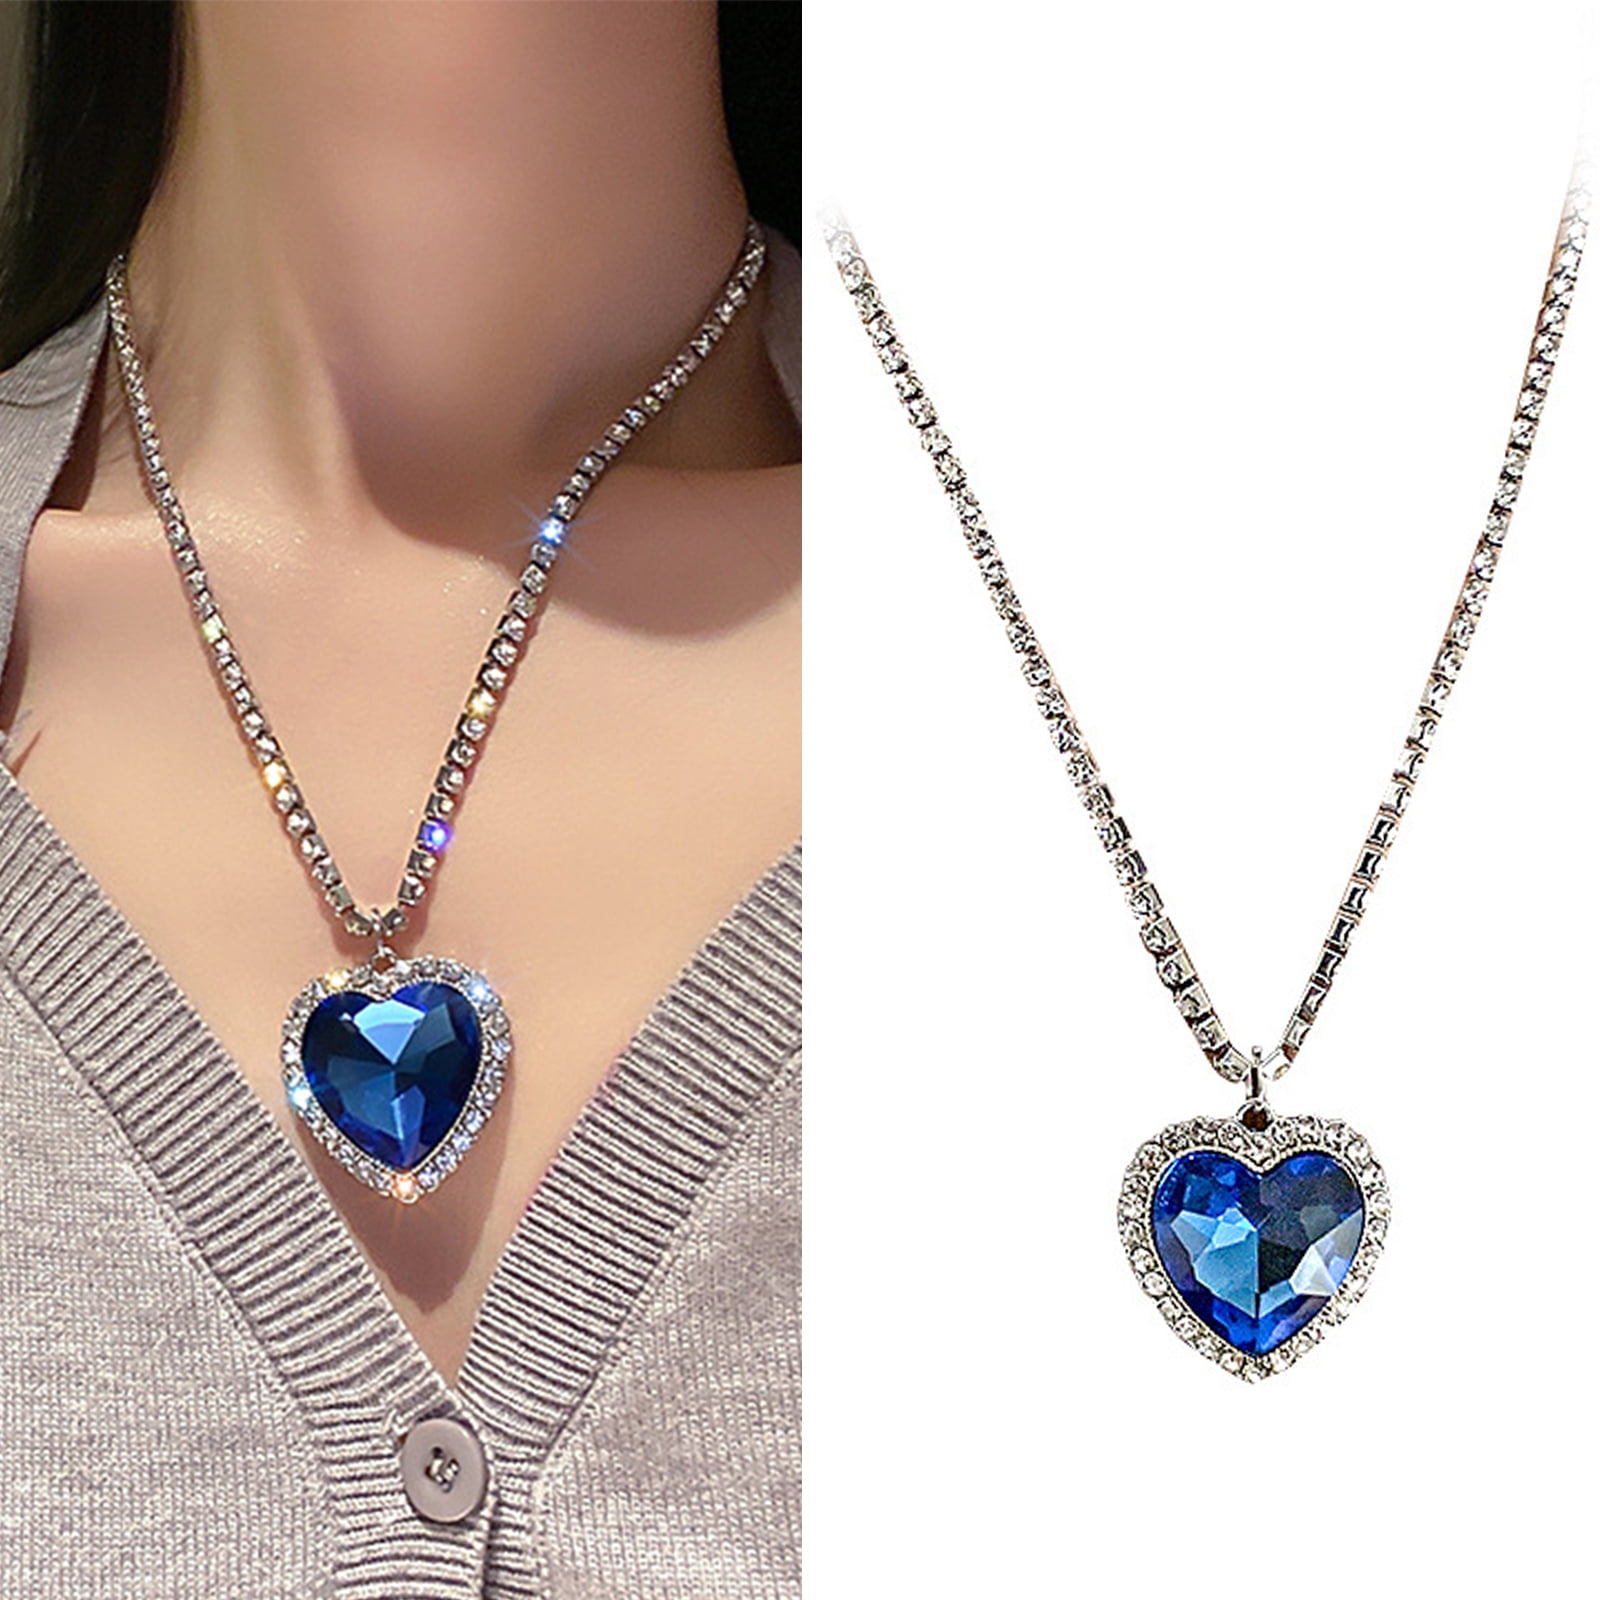 Buy Titanic Heart of The Ocean Necklace Chain at Amazon.in